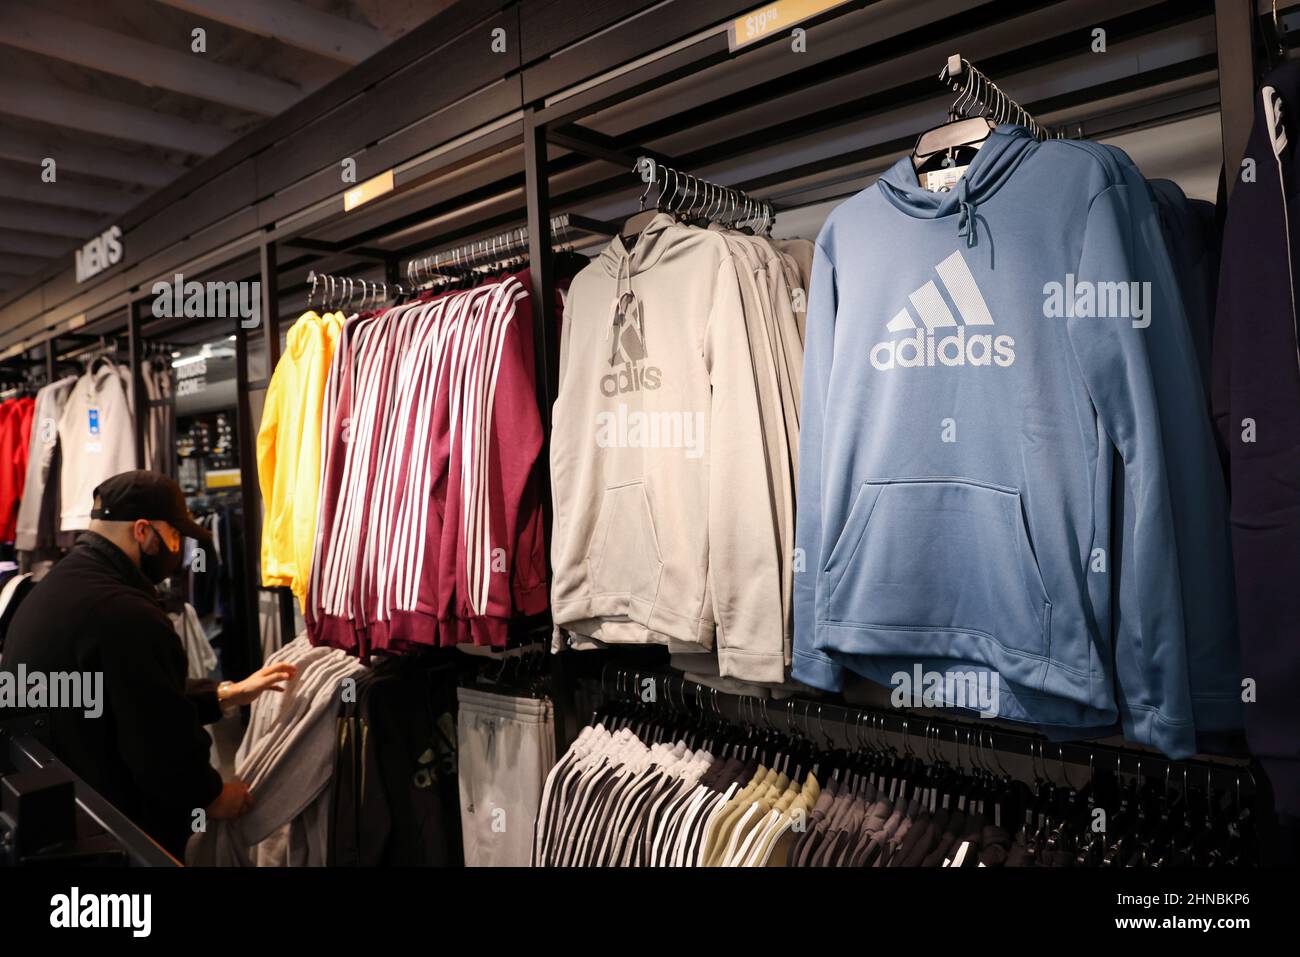 Page 3 - Adidas store High Resolution Stock Photography and Images - Alamy